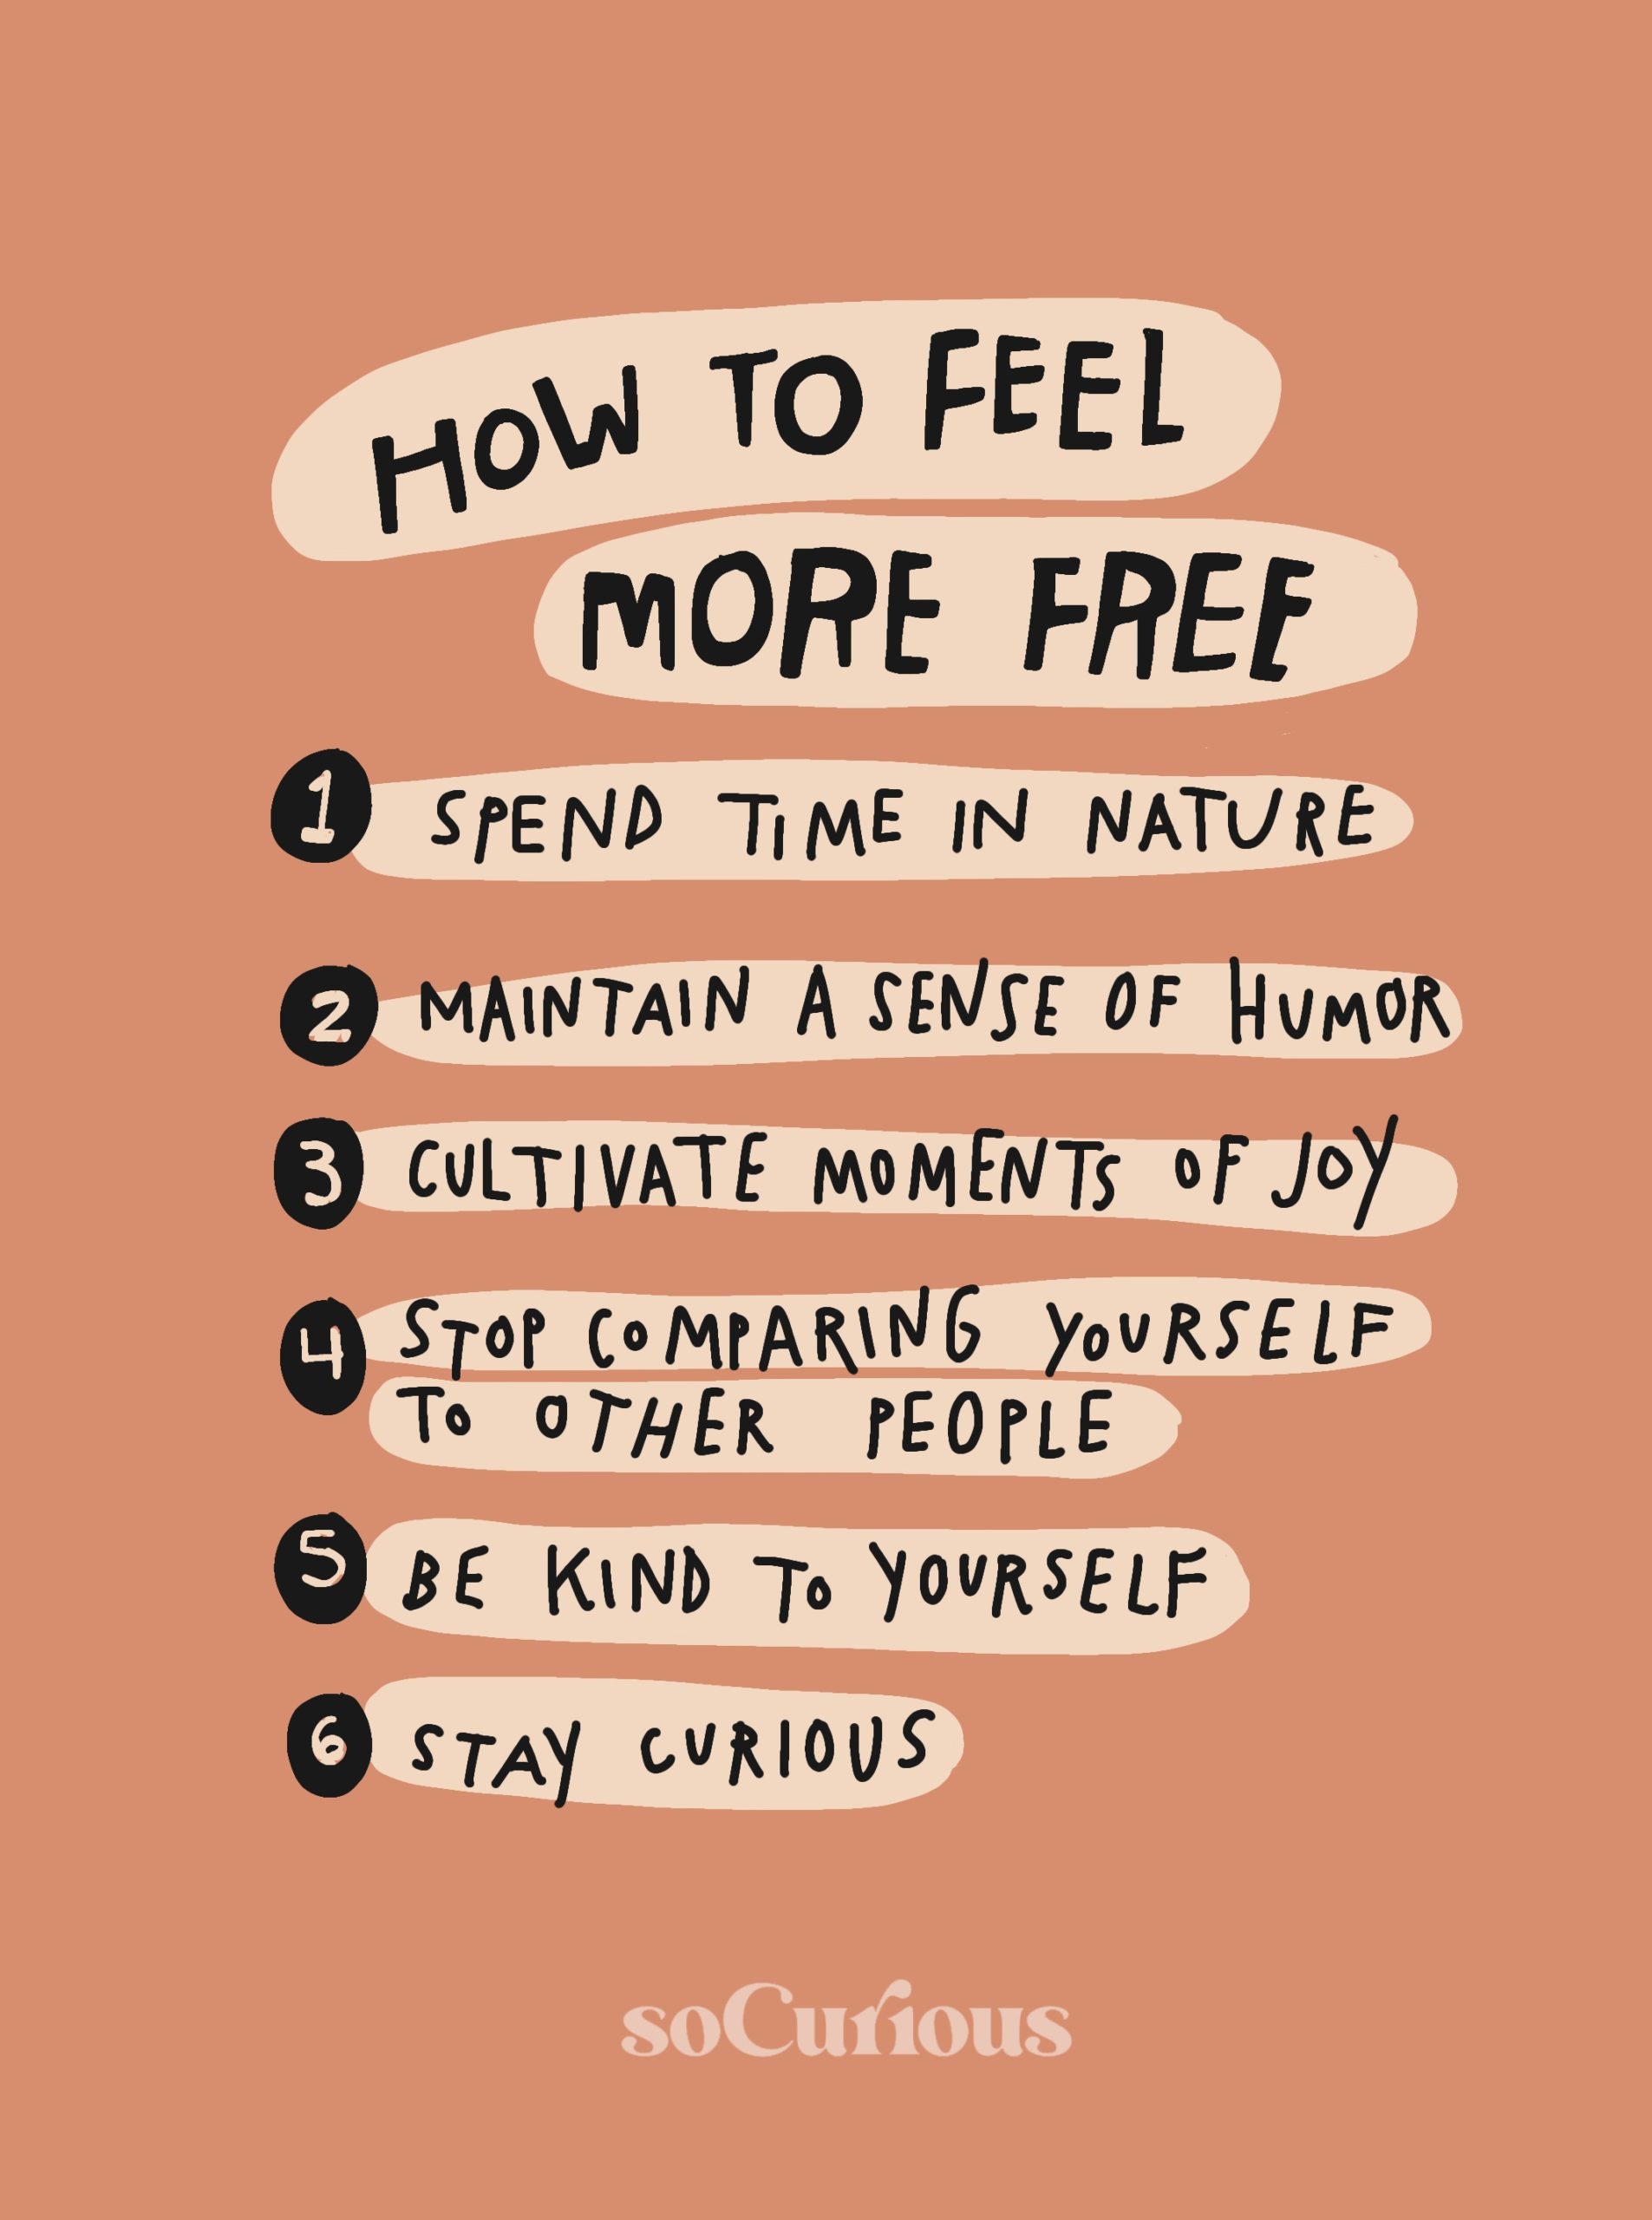 How to Feel More Free